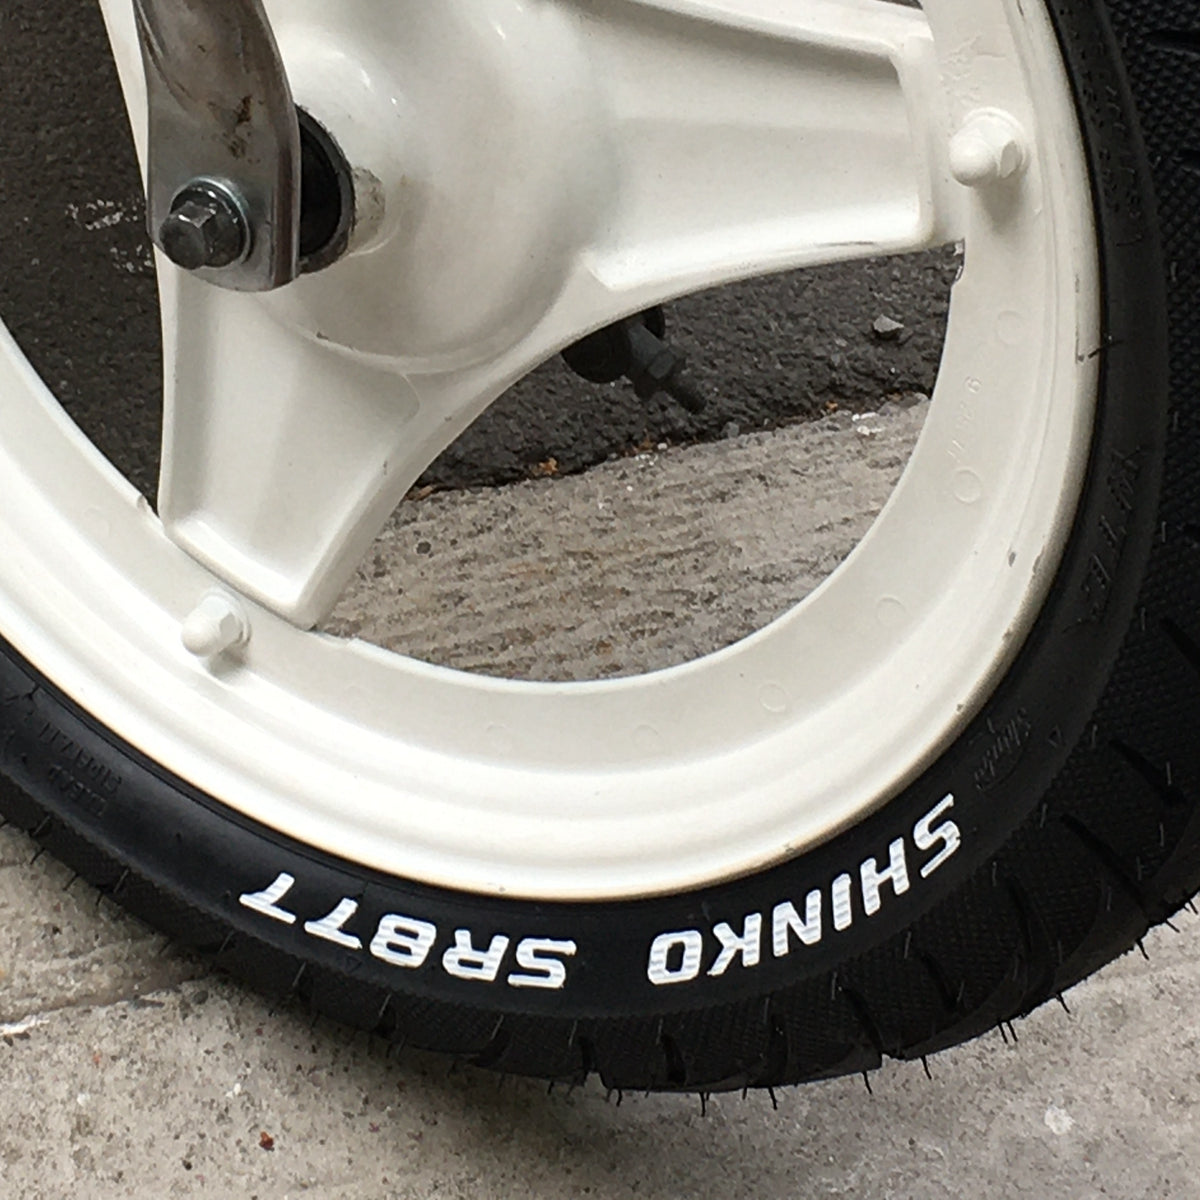 Professional White Tire Marker, Indelible White Writings on Tires